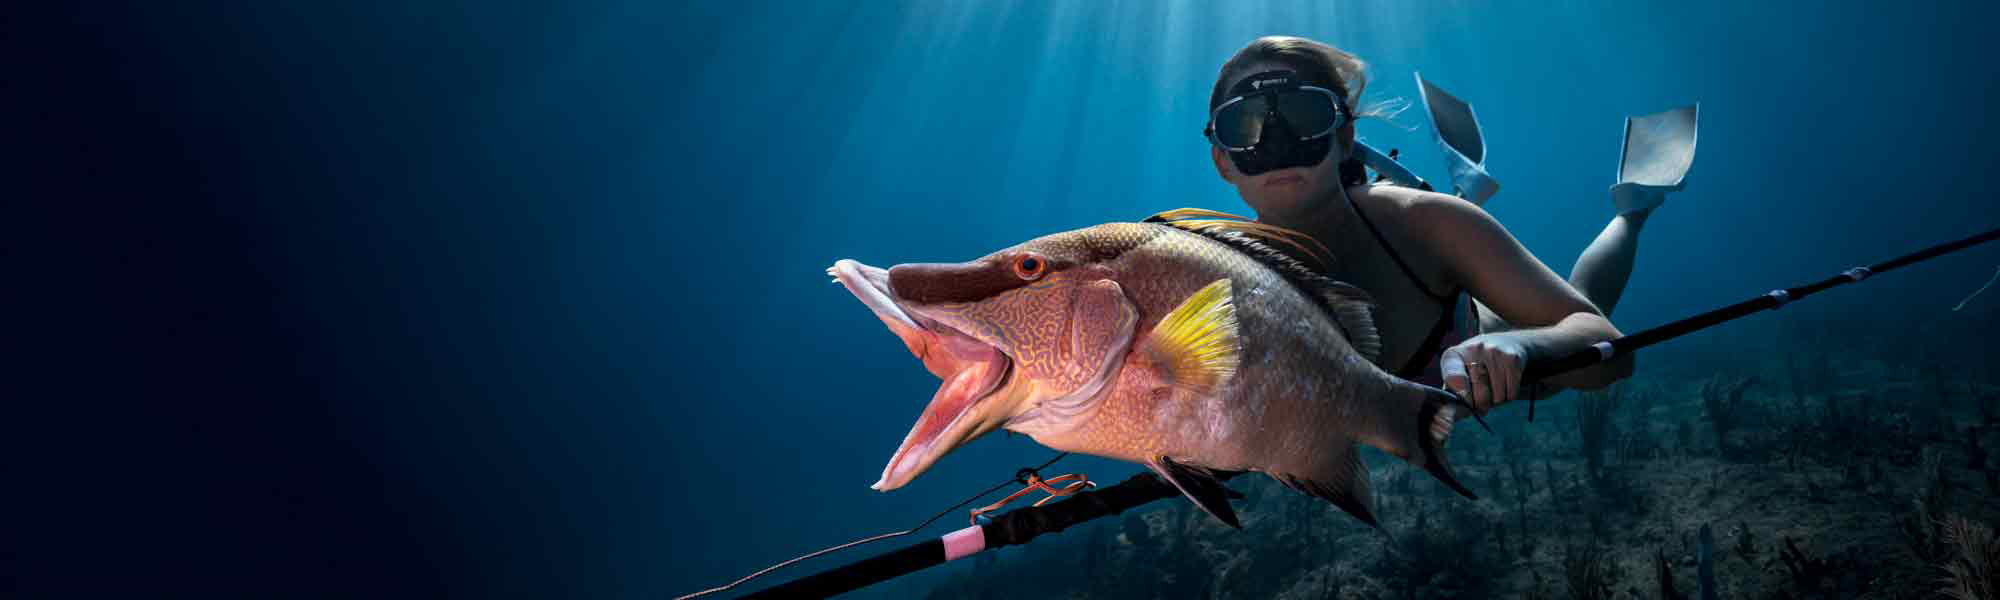 The Headhunter Spearfishing Co.  Designers of performance pole spears,  hawaiian slings, and quality apparel for the ocean-minded lifestyle.